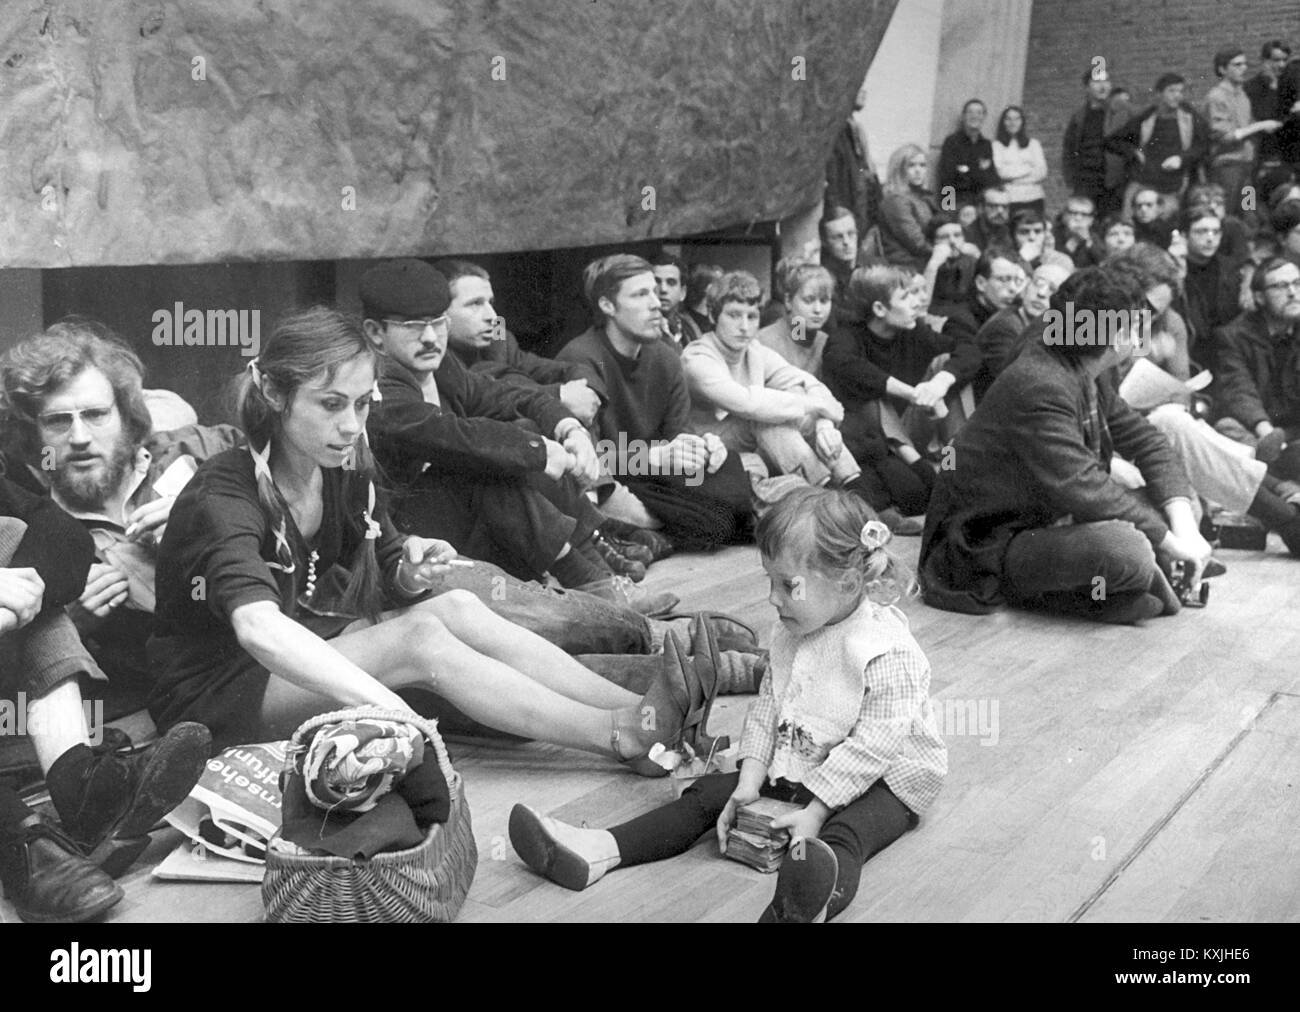 Students, including a young mother and her little girl, sit in the vestibule of the Technical University in Berlin on February 17,1968 during the 'International Vietnam Conference'. Almost 3,000 young people accepted the invitation of the Socialist German Student Union (SDS) and numerous left-wing socialist youth organizations. In the crowded Auditorium Maximum, the predominantly student audience gathered in front of a large Vietkong flag. Hundreds of participants had settled down in front of the hall due to a lack of space. | usage worldwide Stock Photo